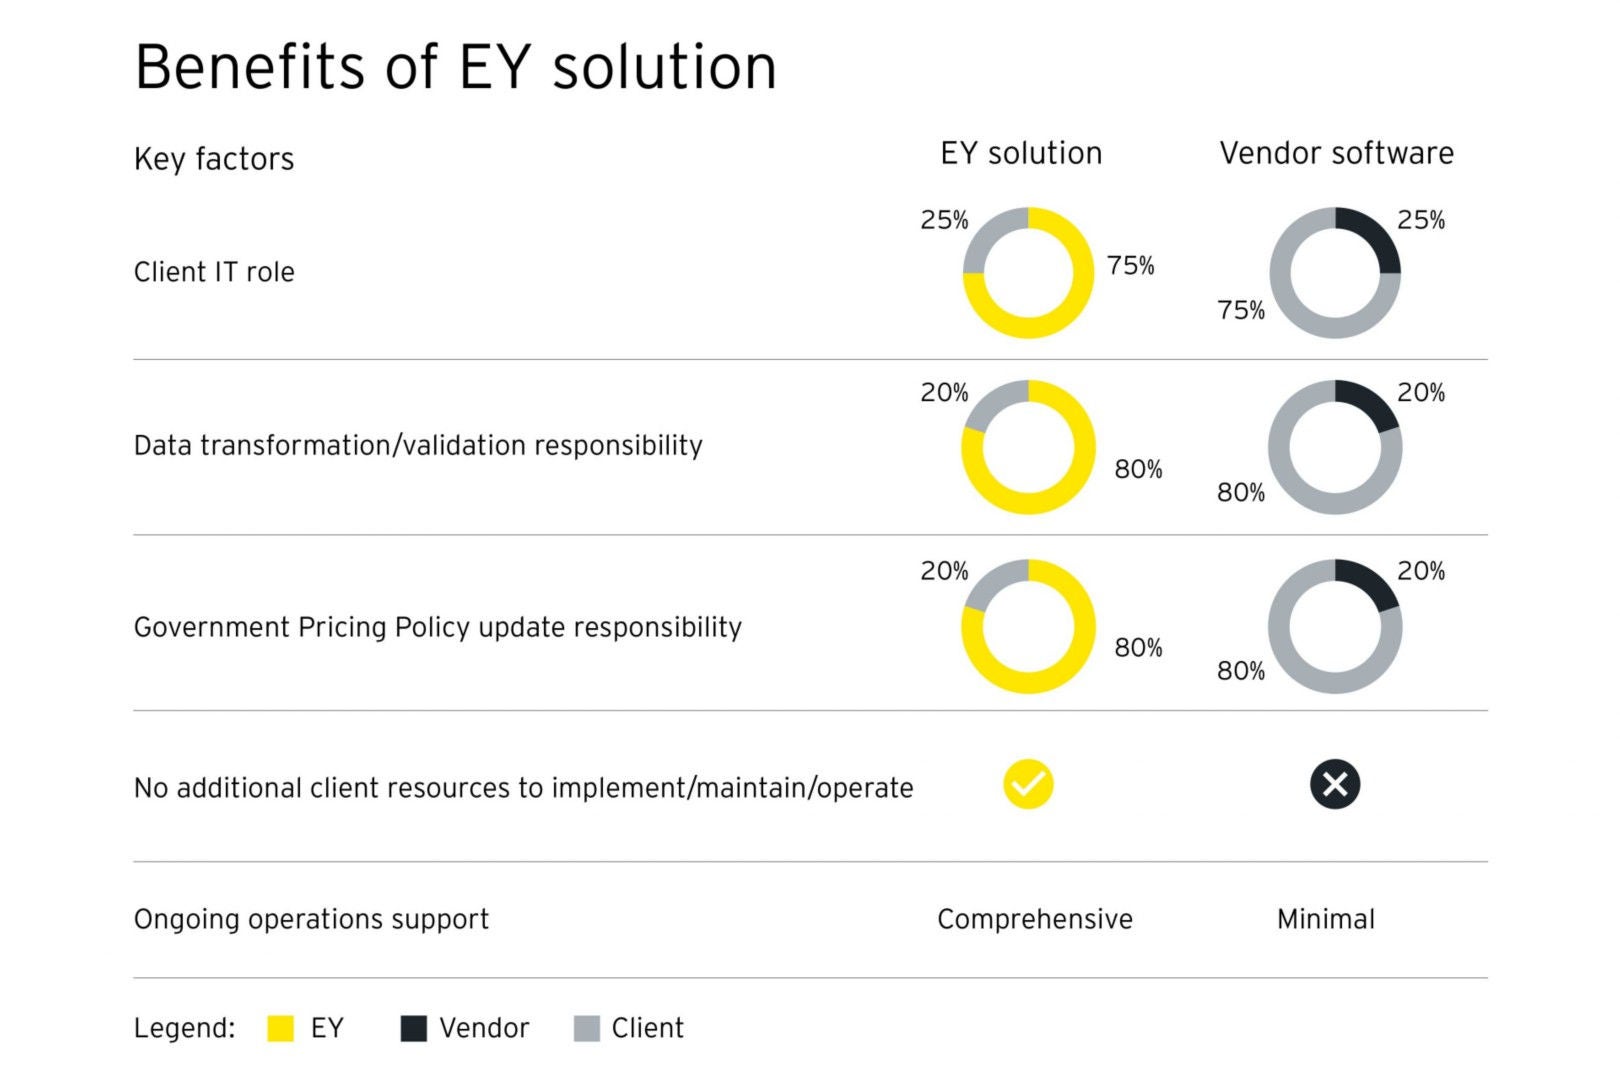 Benefits of EY solution